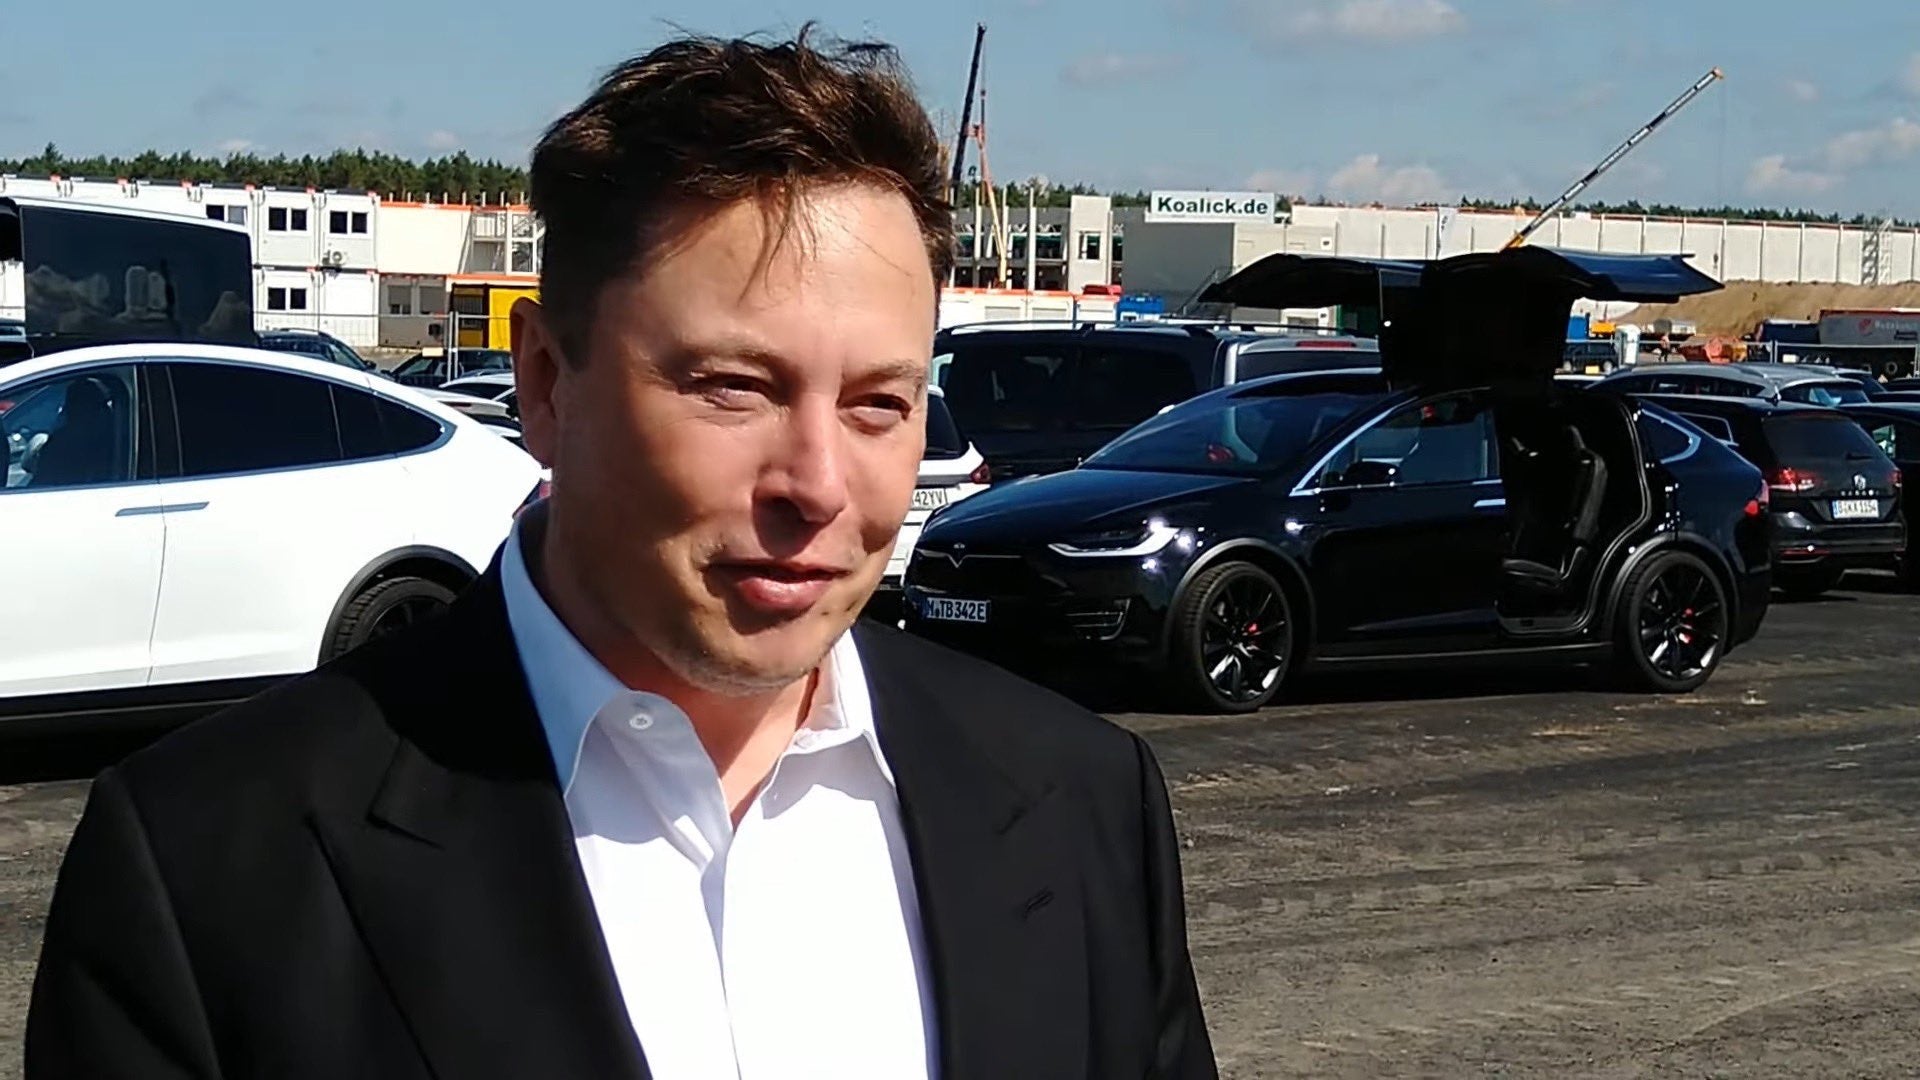 Elon Musk: I'm pretty confident, Giga Berlin will be the most environmental-friendly factory in the world